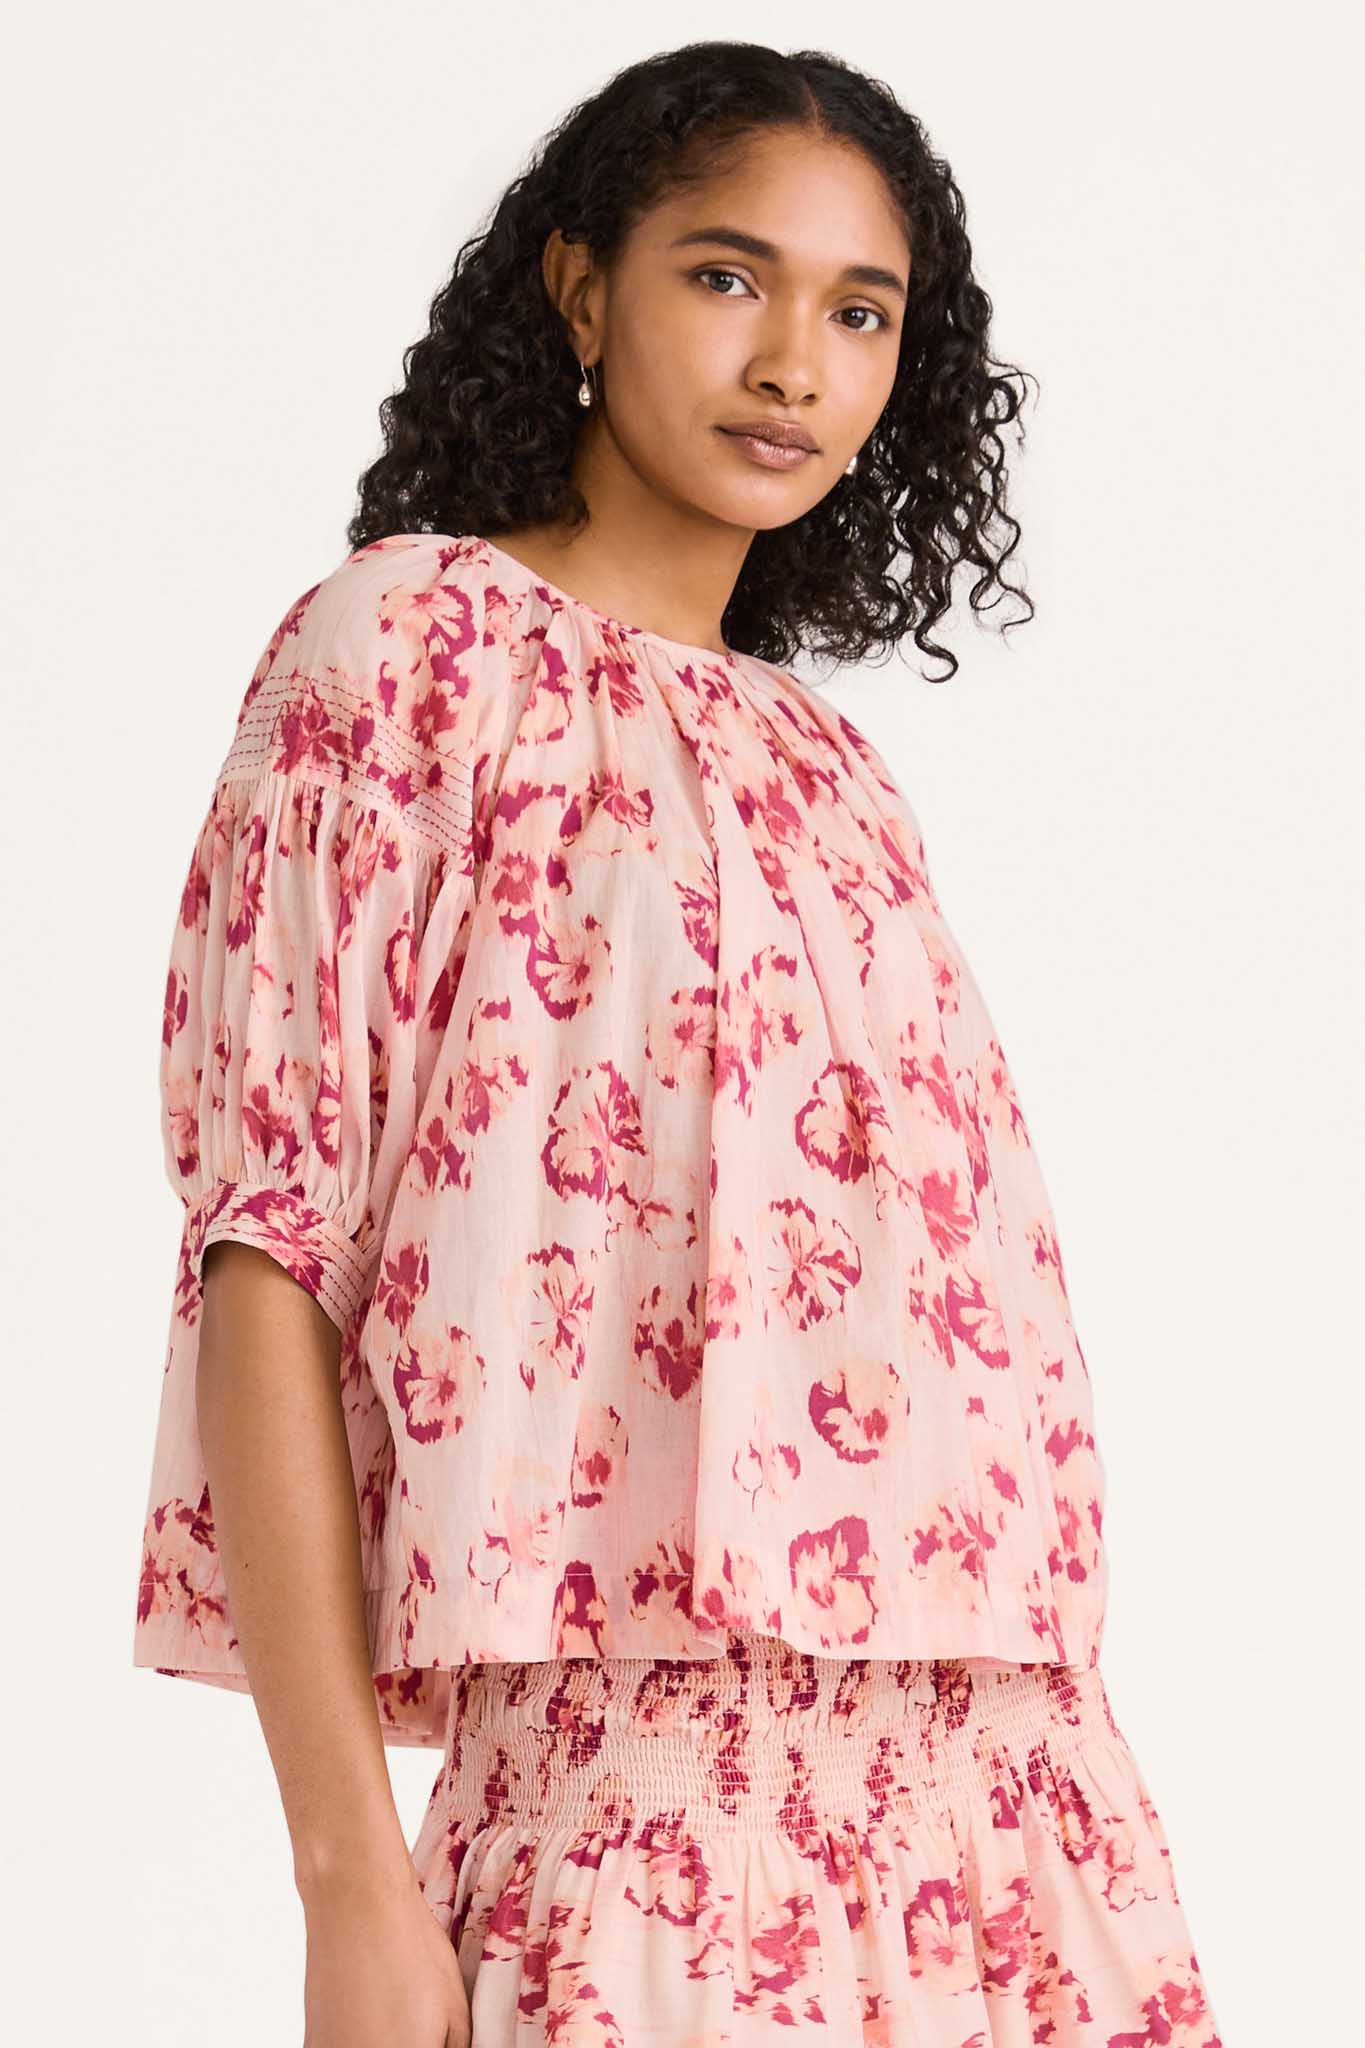 Zenith Top in Orchid Ikat Floral Print